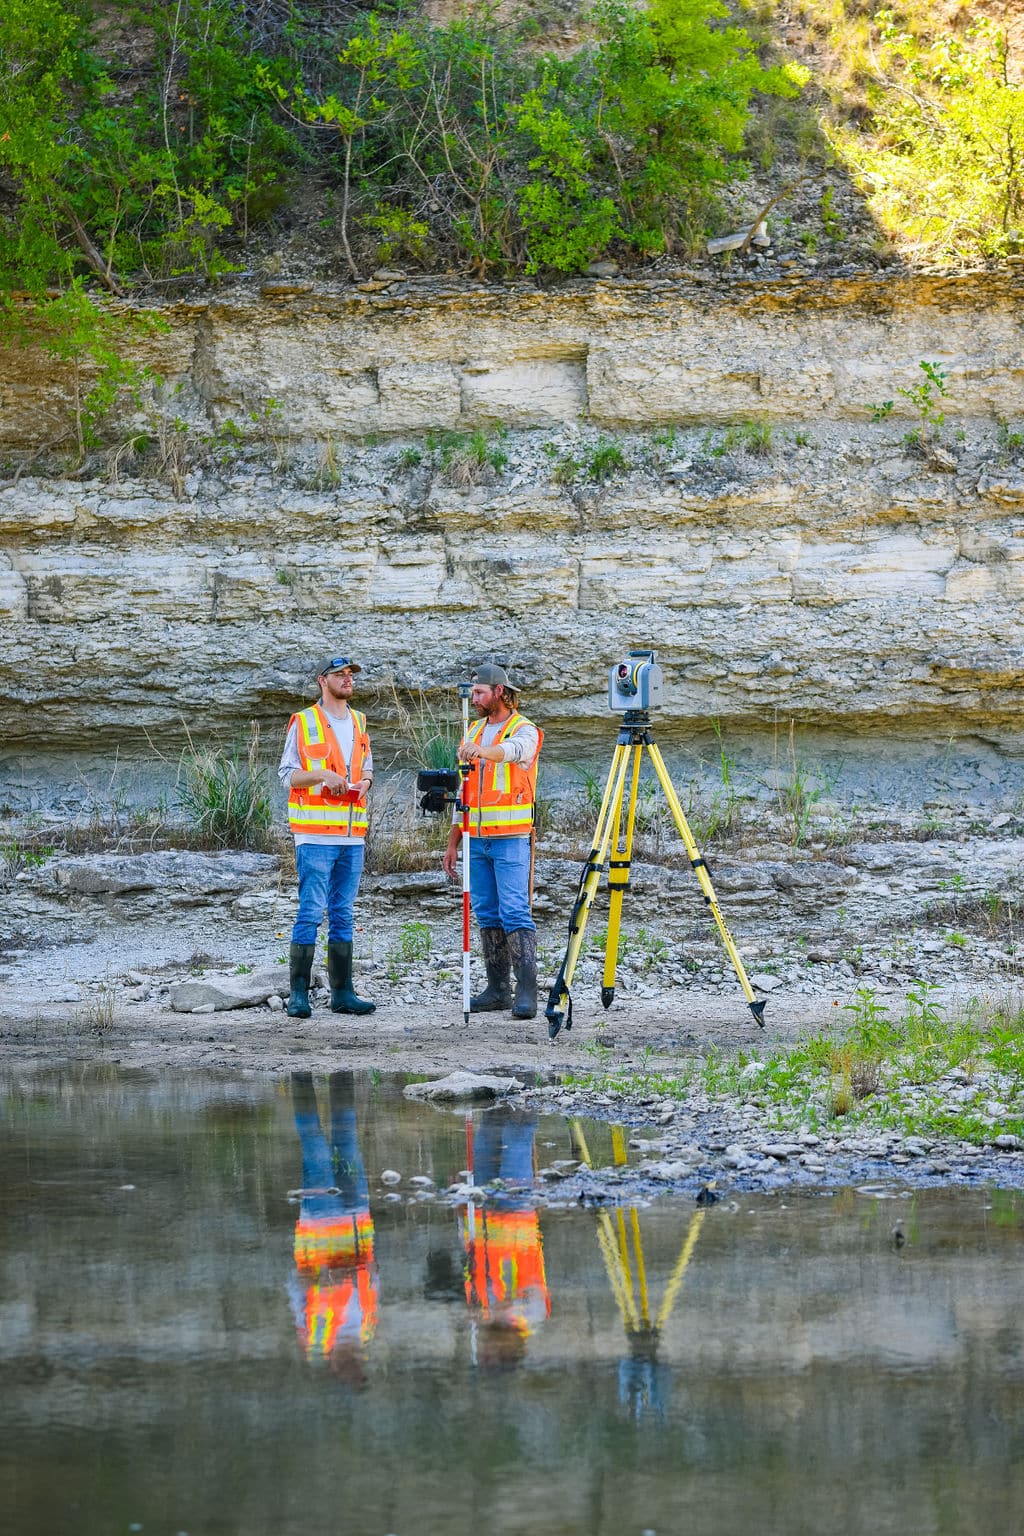 Land surveyors prepare geospatial services tool, Total Robotic Station, for bridge and highway survey